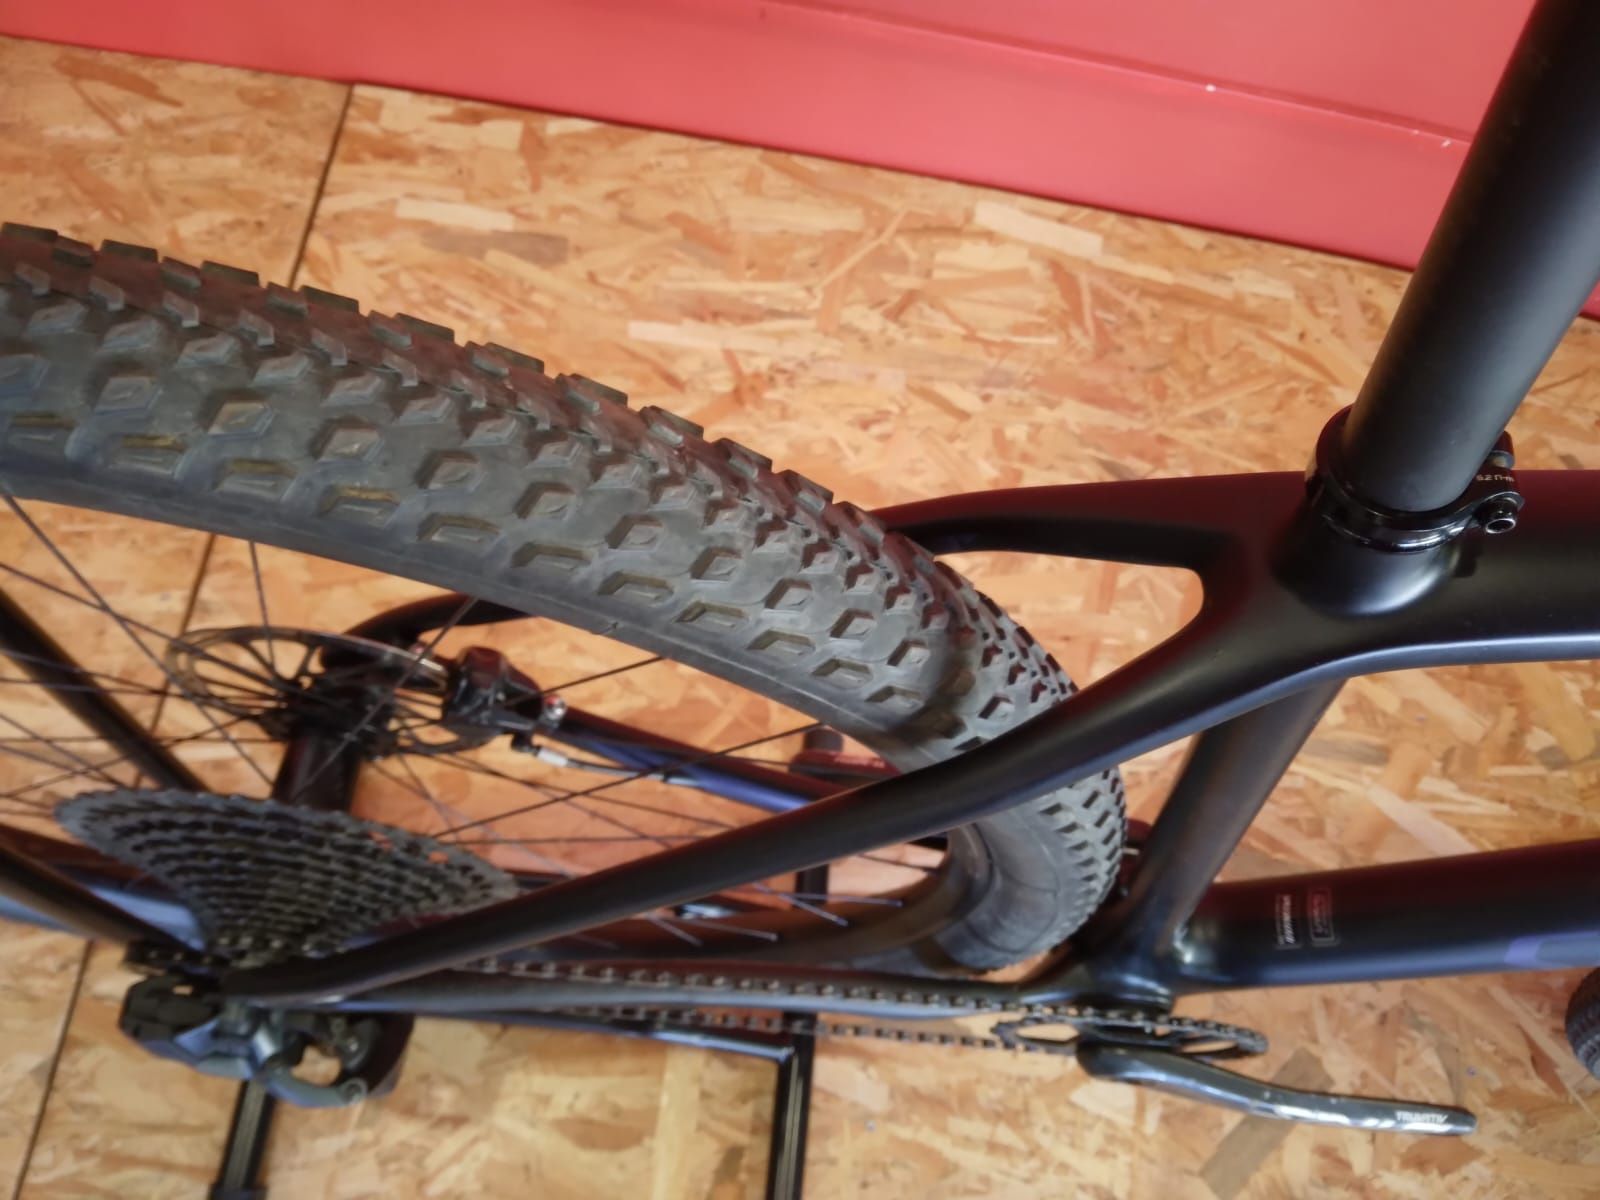 Specialized epic HT